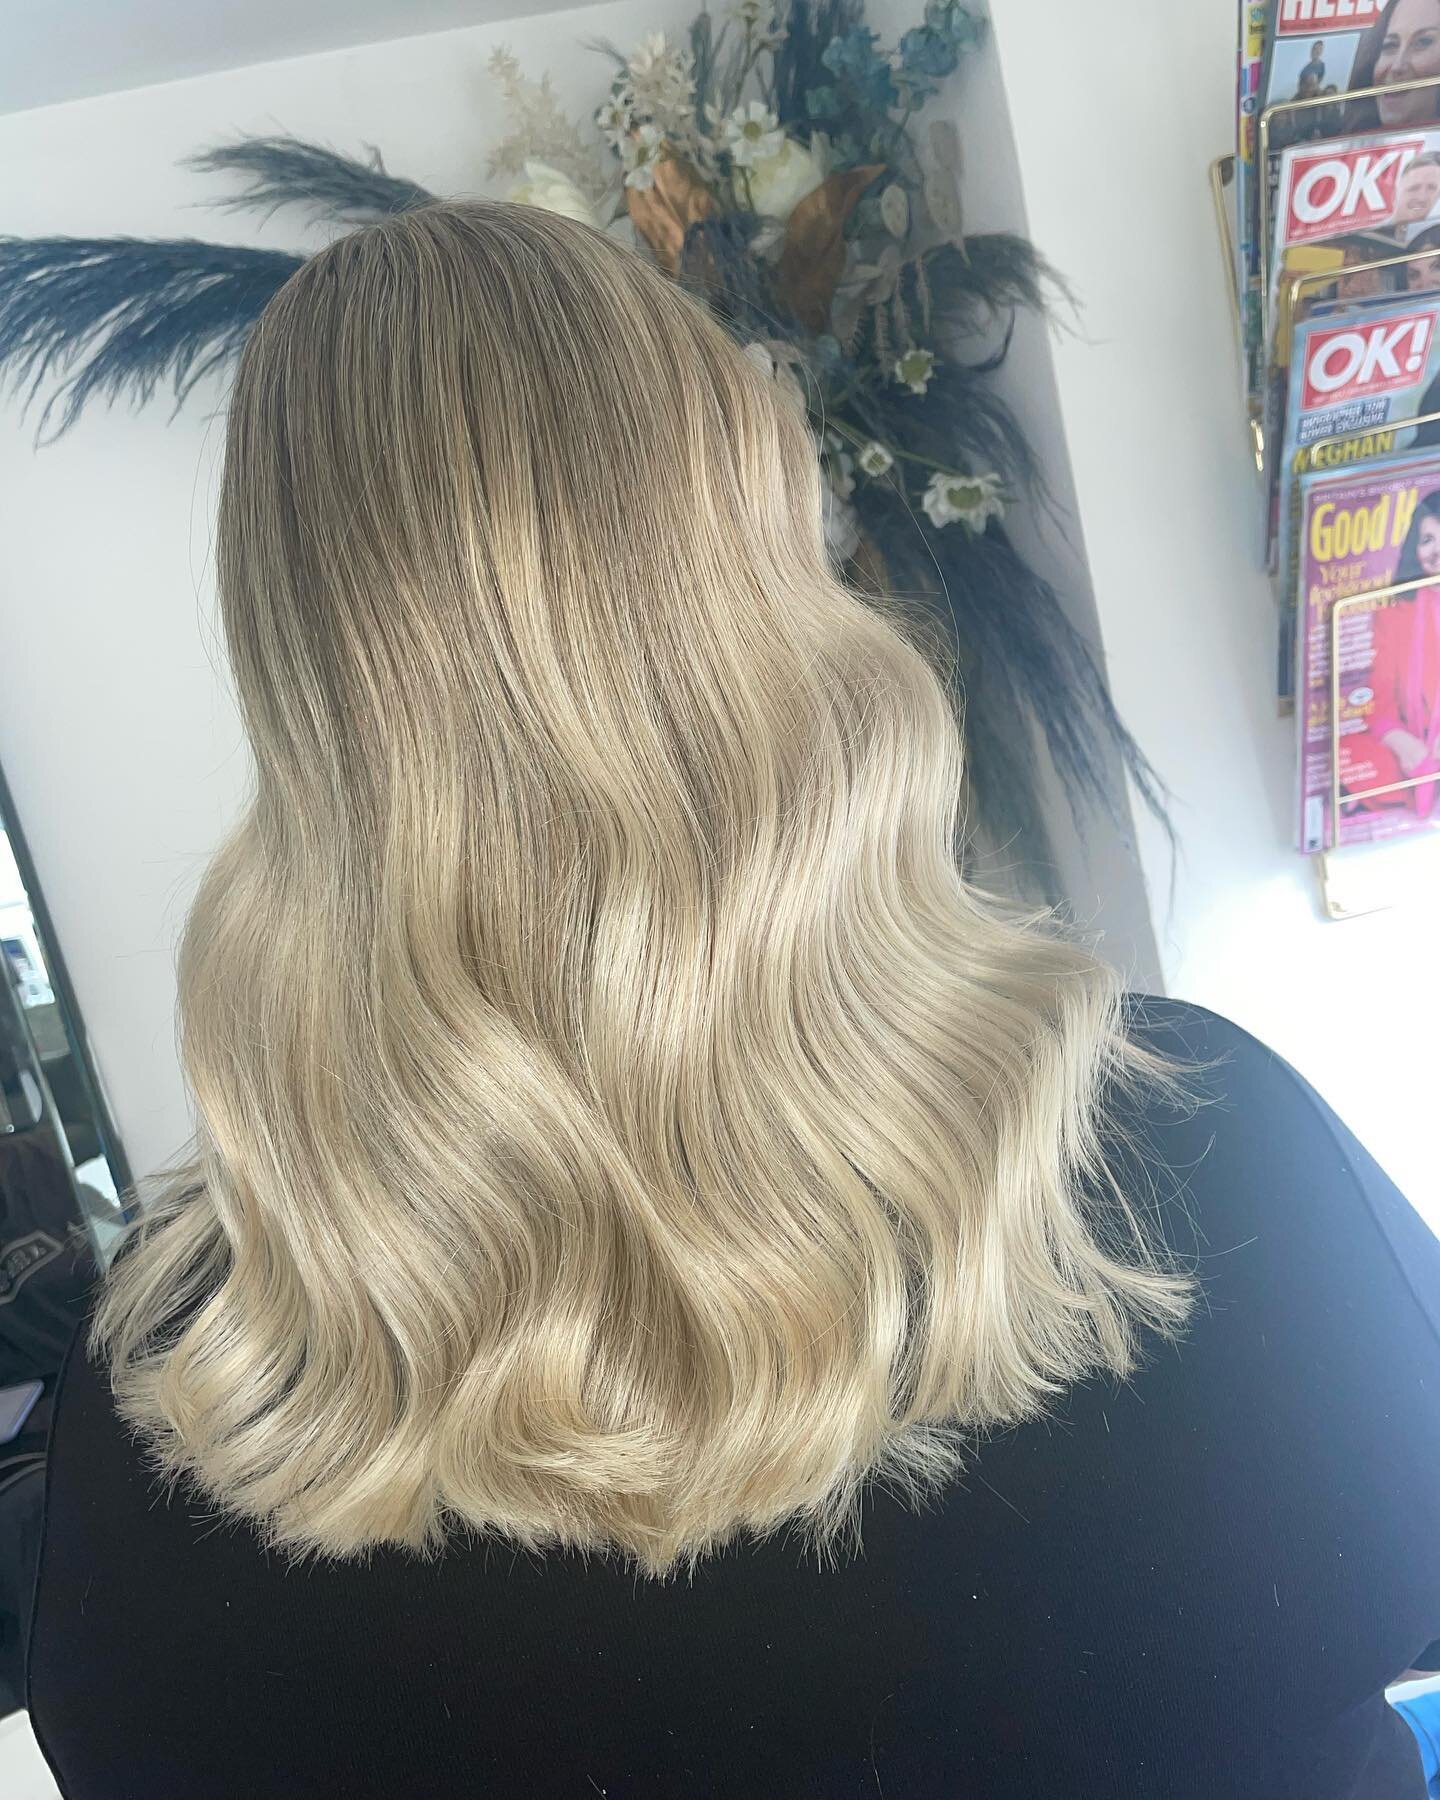 When you haven&rsquo;t had your hair done in over a year 💇🏼&zwj;♀️

#blondehair #glosshairsalon #miltonkeynes